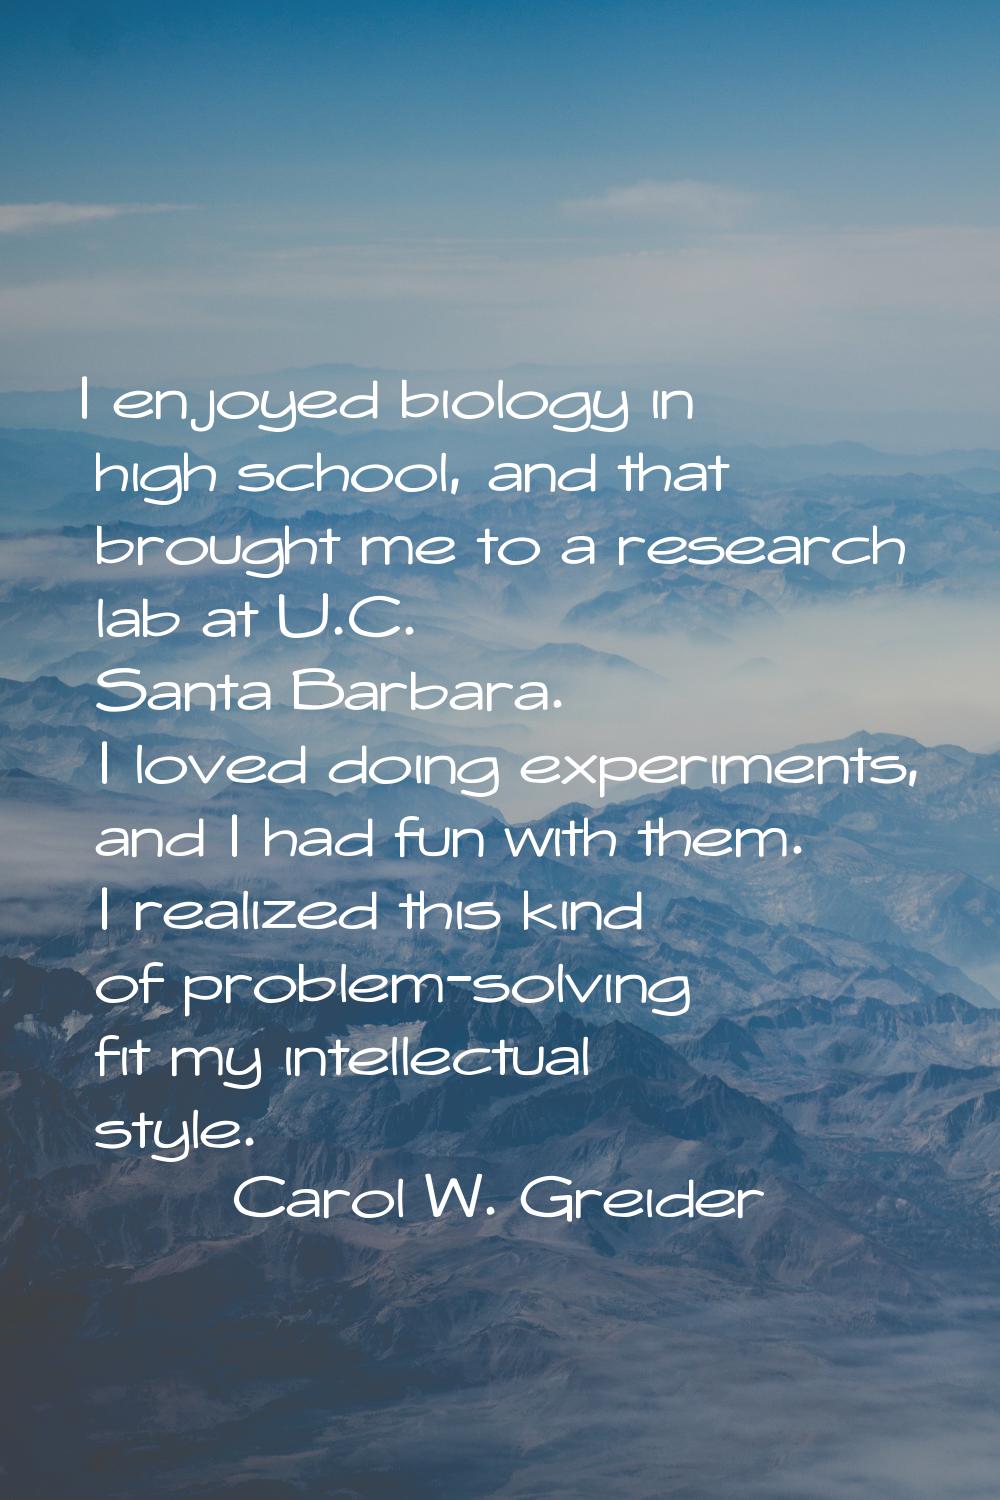 I enjoyed biology in high school, and that brought me to a research lab at U.C. Santa Barbara. I lo